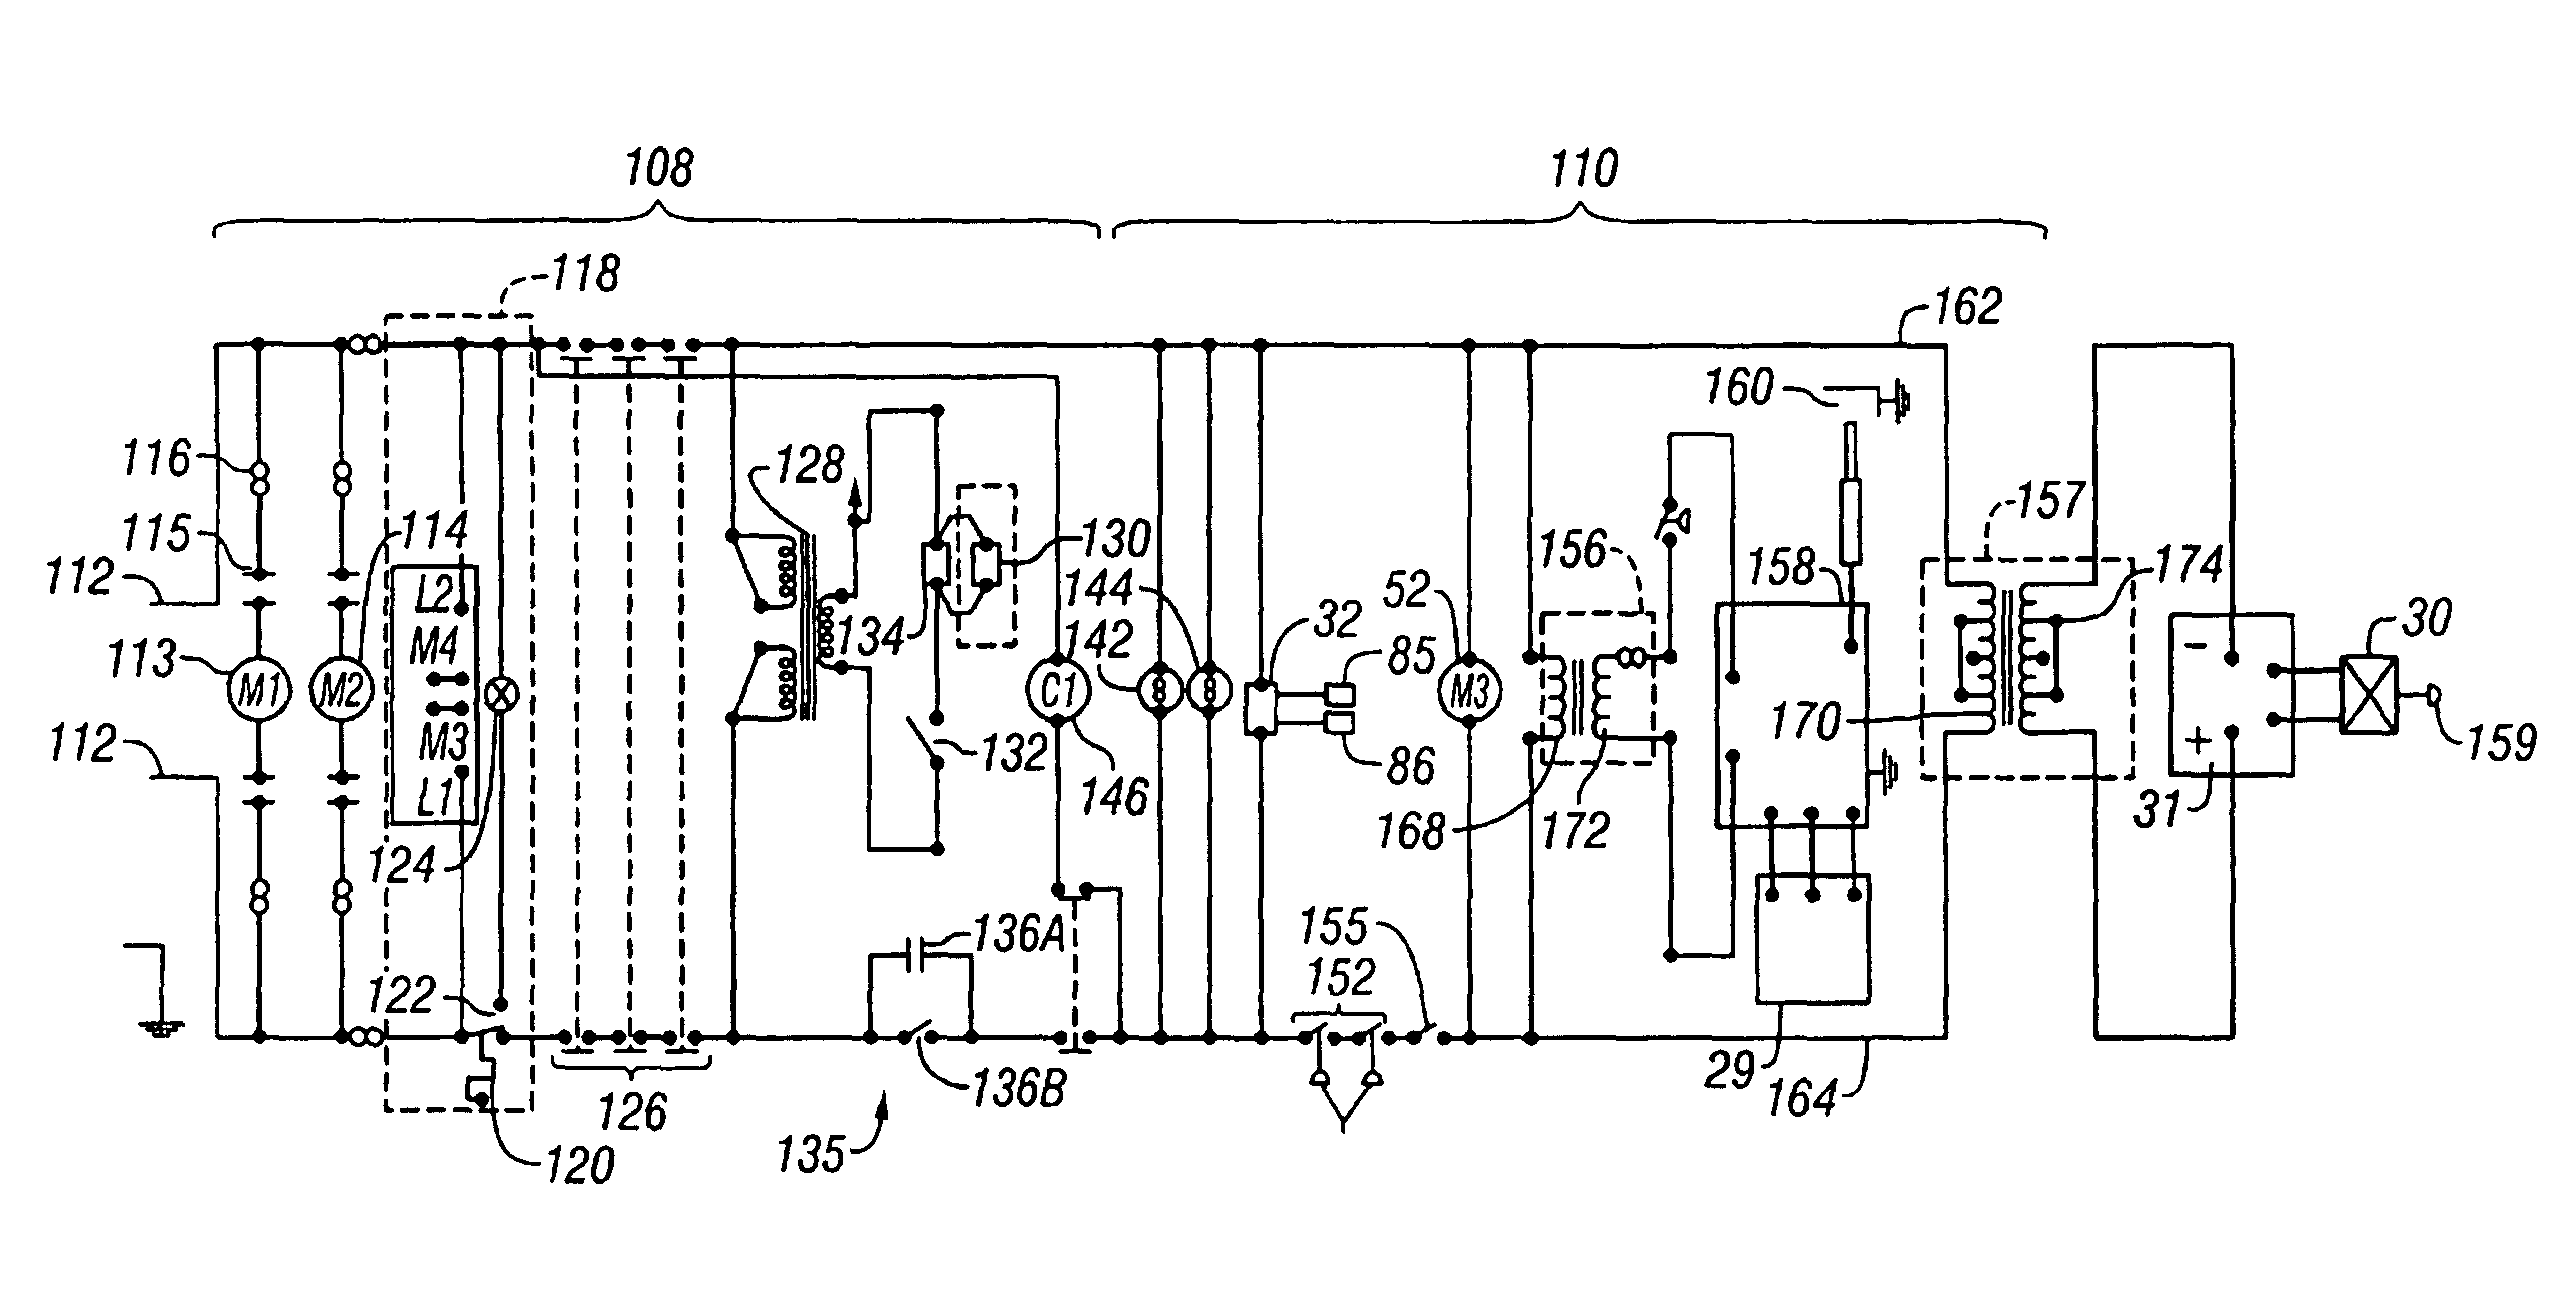 Conveyor oven having an energy management system for a modulated gas flow